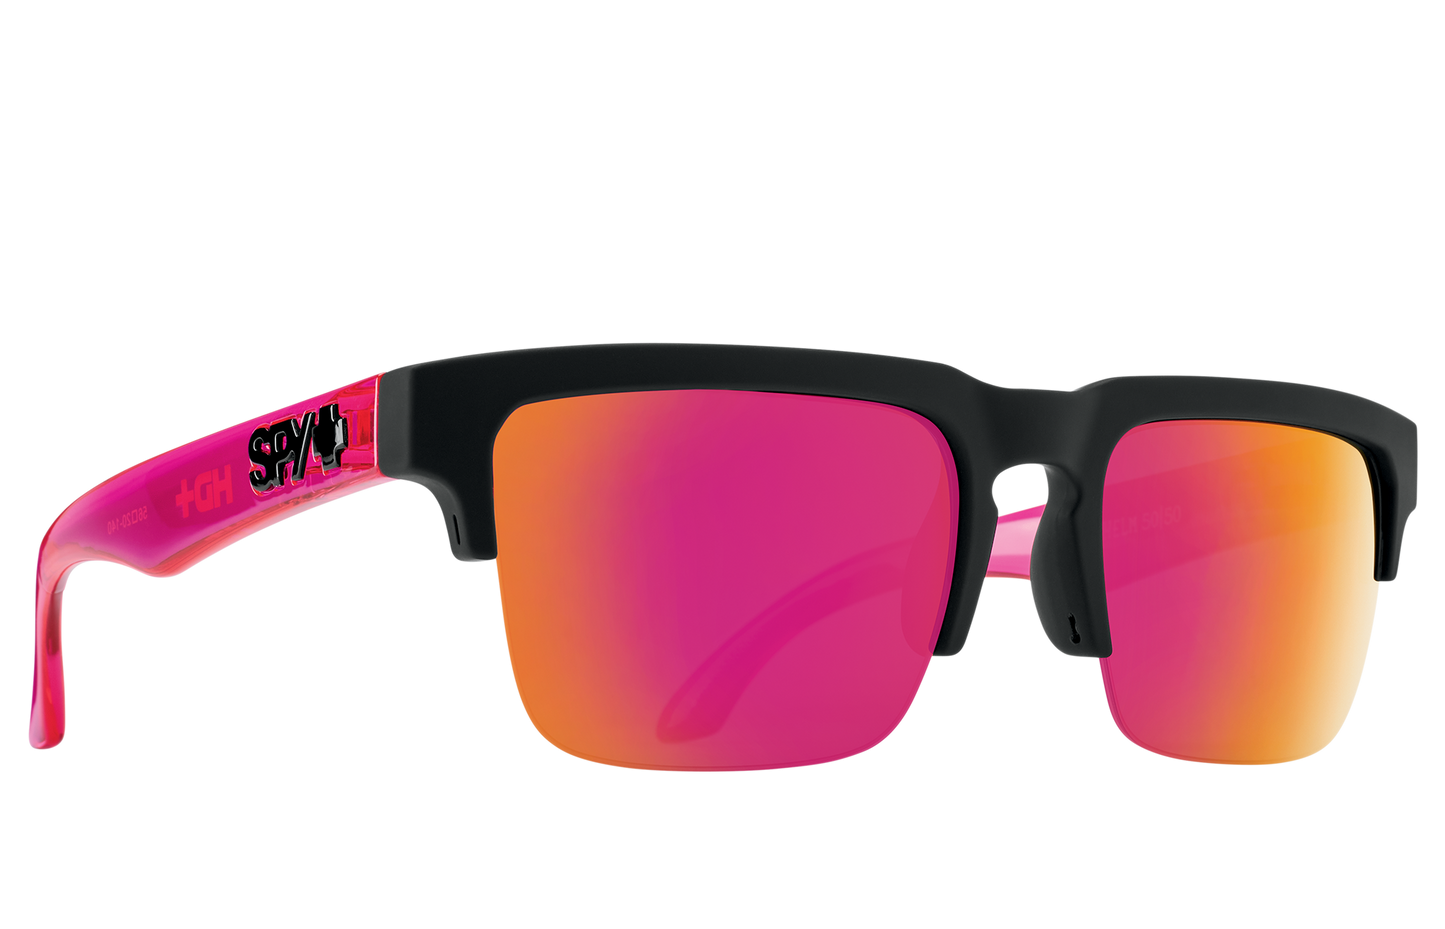 SPY Helm 50/50 Sunglasses  Happy Gray Green with Pink Spectra Mirror Soft Matte Black Translucent Pink  56-20-140